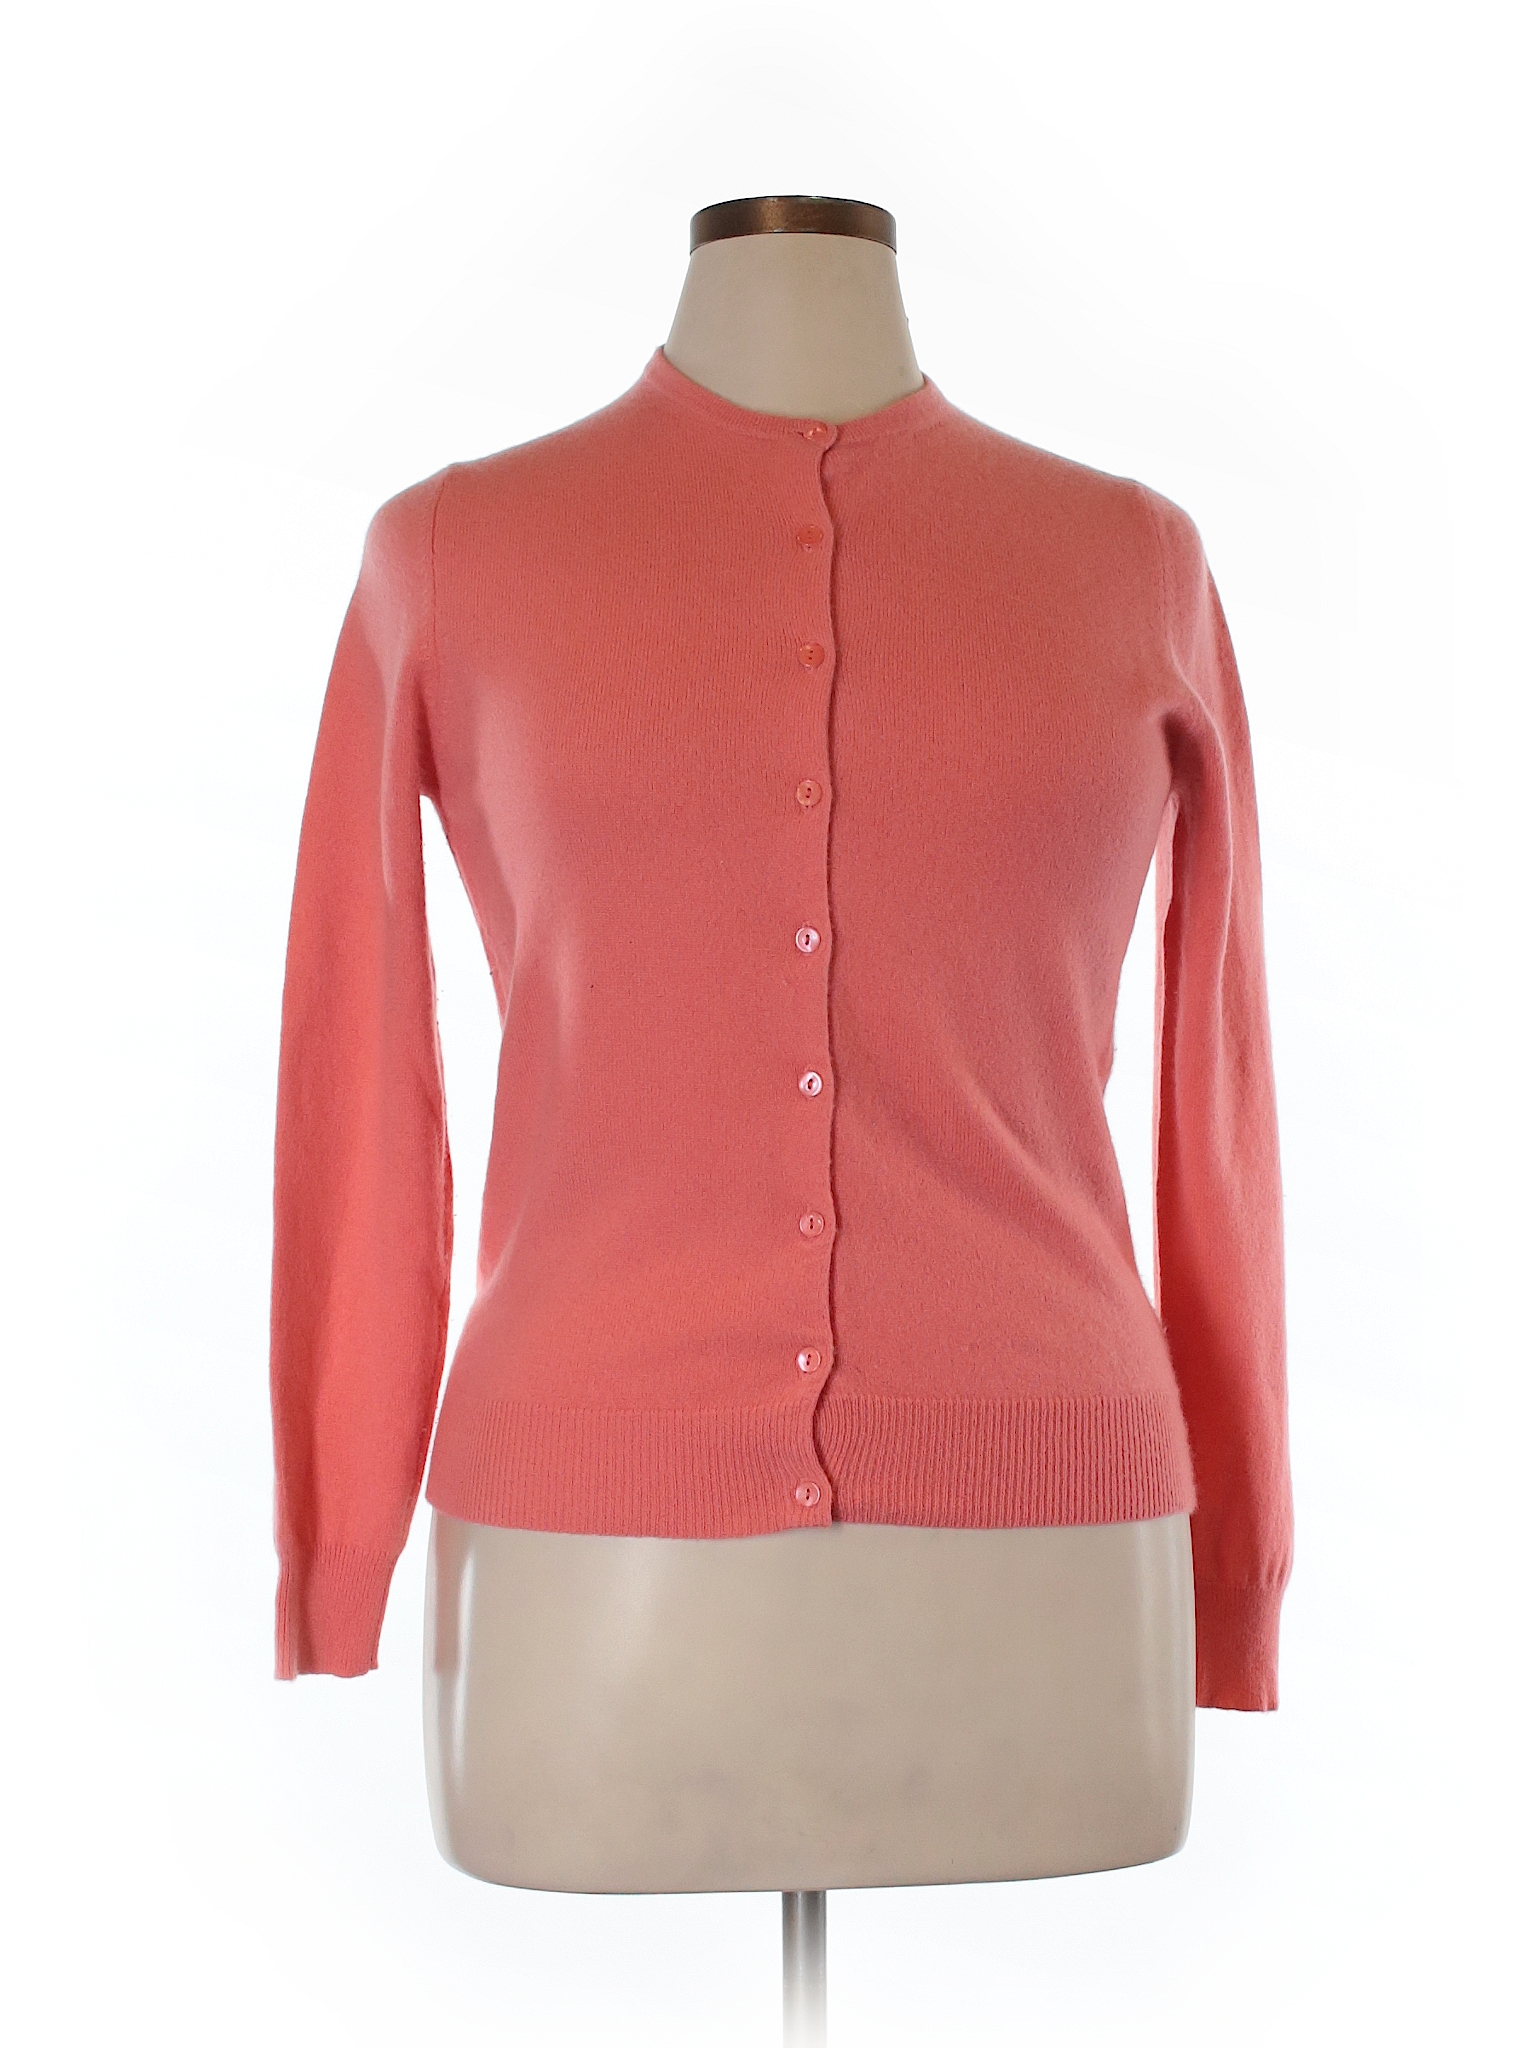 Lord & Taylor 100% Cashmere Solid Coral Cashmere Cardigan Size XL - 81% ...